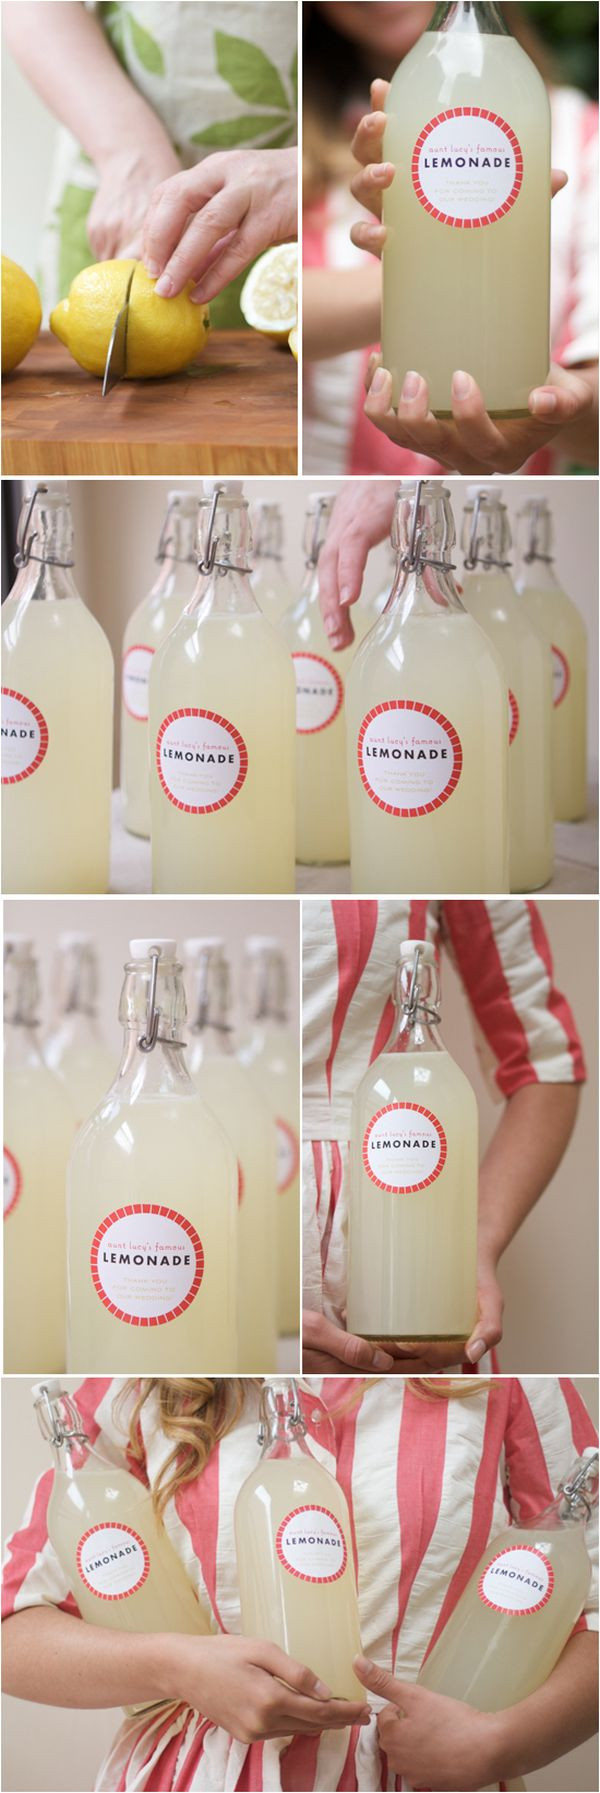 Cute Ideas For Engagement Party
 35 Cute And Easy To Make Wedding Favor Ideas